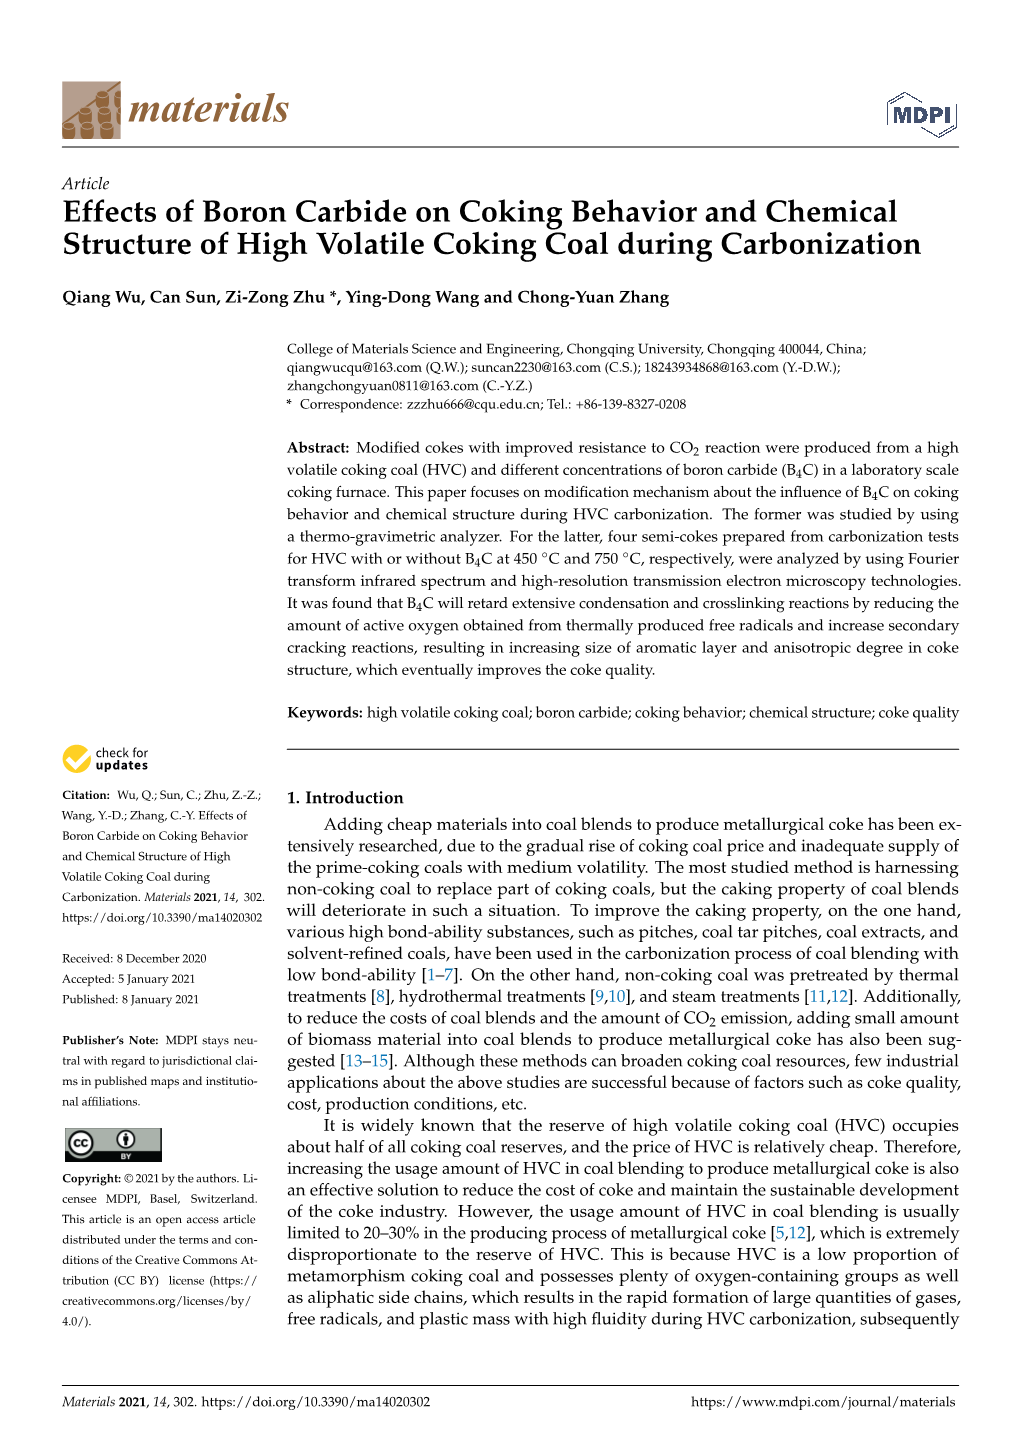 Effects of Boron Carbide on Coking Behavior and Chemical Structure of High Volatile Coking Coal During Carbonization